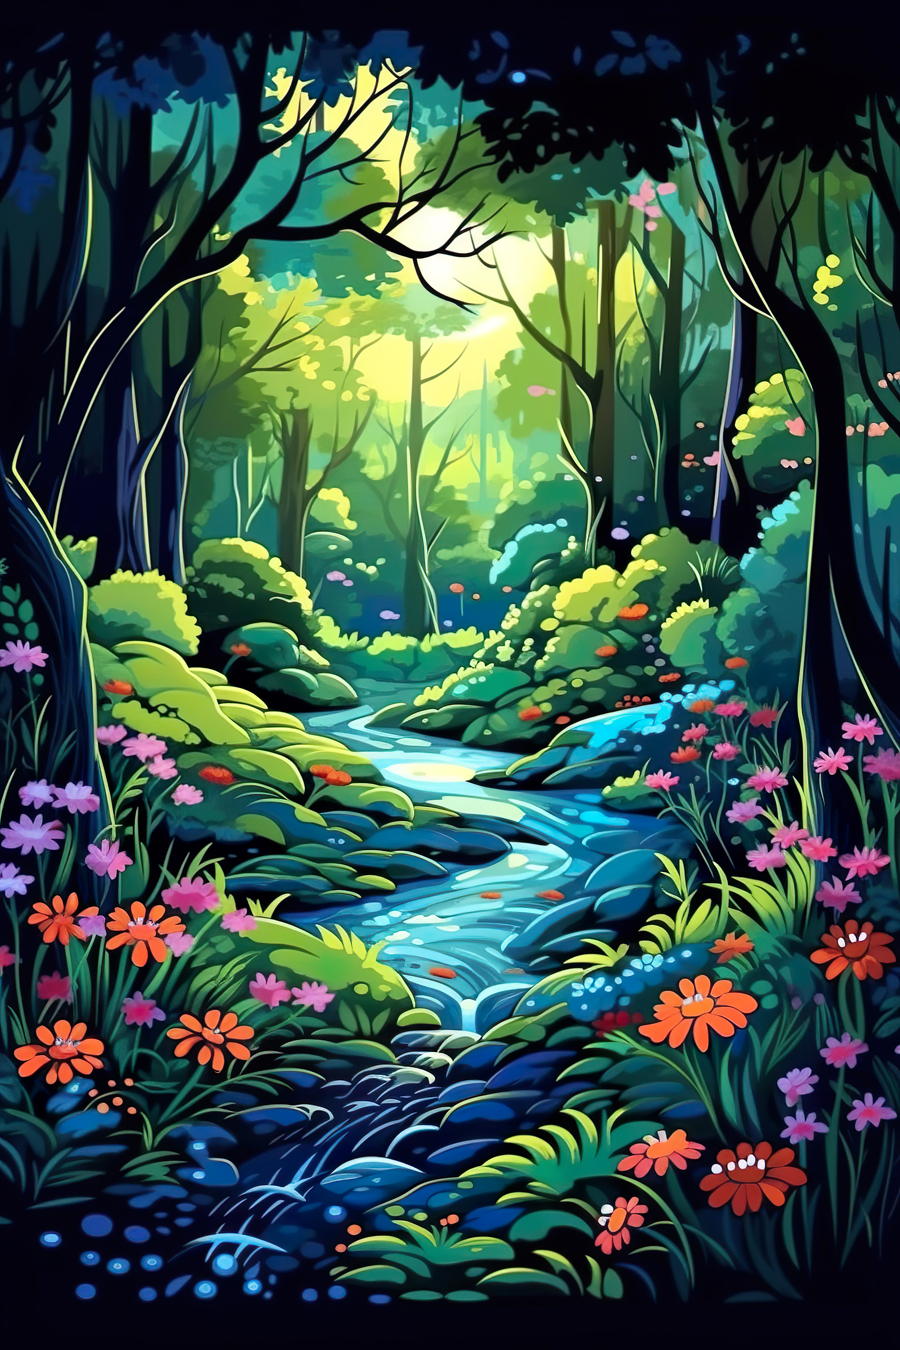 A painting of a forest with a stream and flowers.